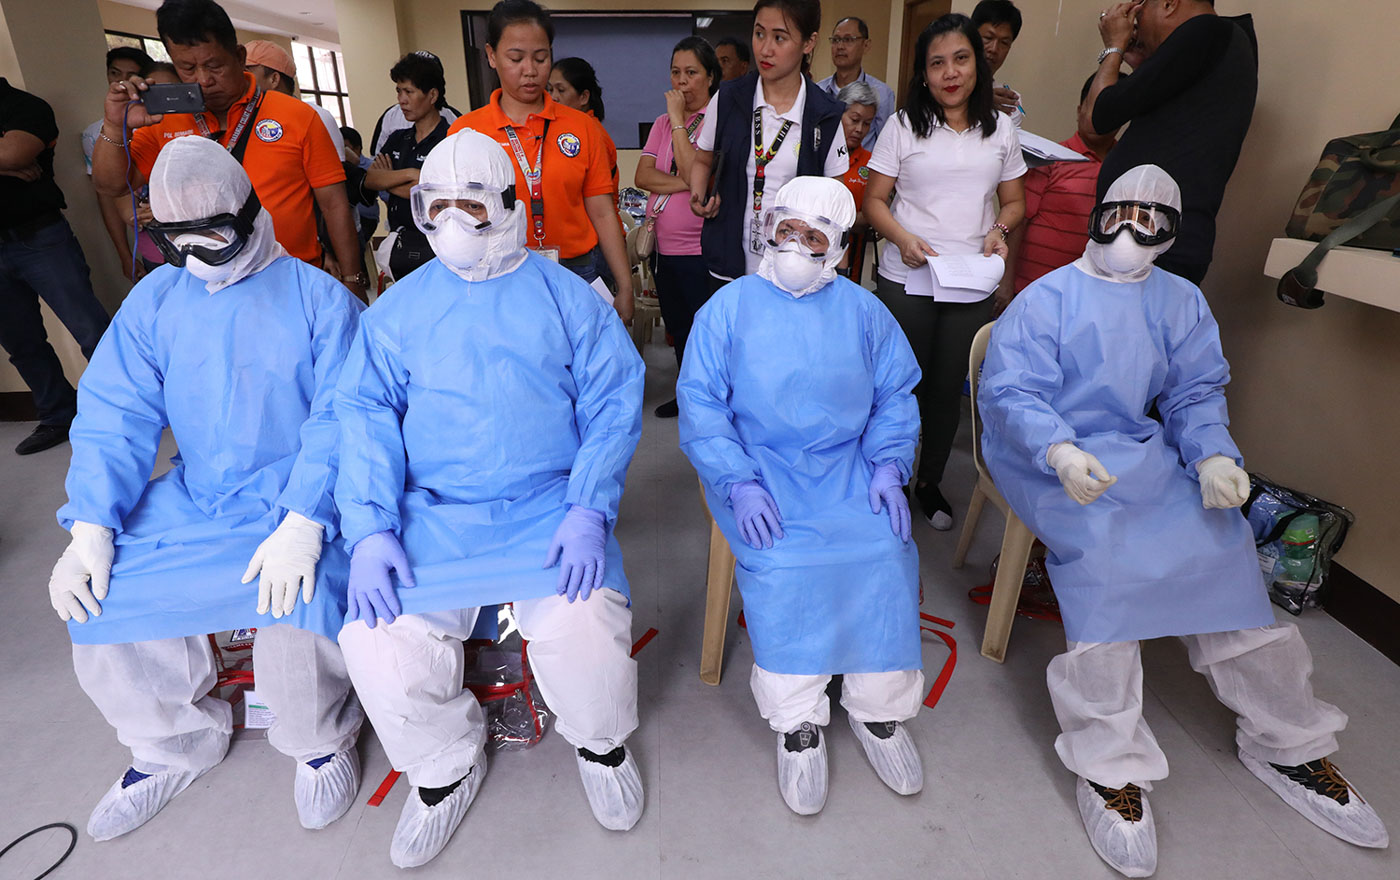 PROTECTION. The Quezon City Disaster Risk Reduction and Management Office
on March 5, 2020, demonstrates to barangay first responders how to use the protective
gear properly in case COVID-19 hit their barangays. File photo by Darren Langit/Rappler  